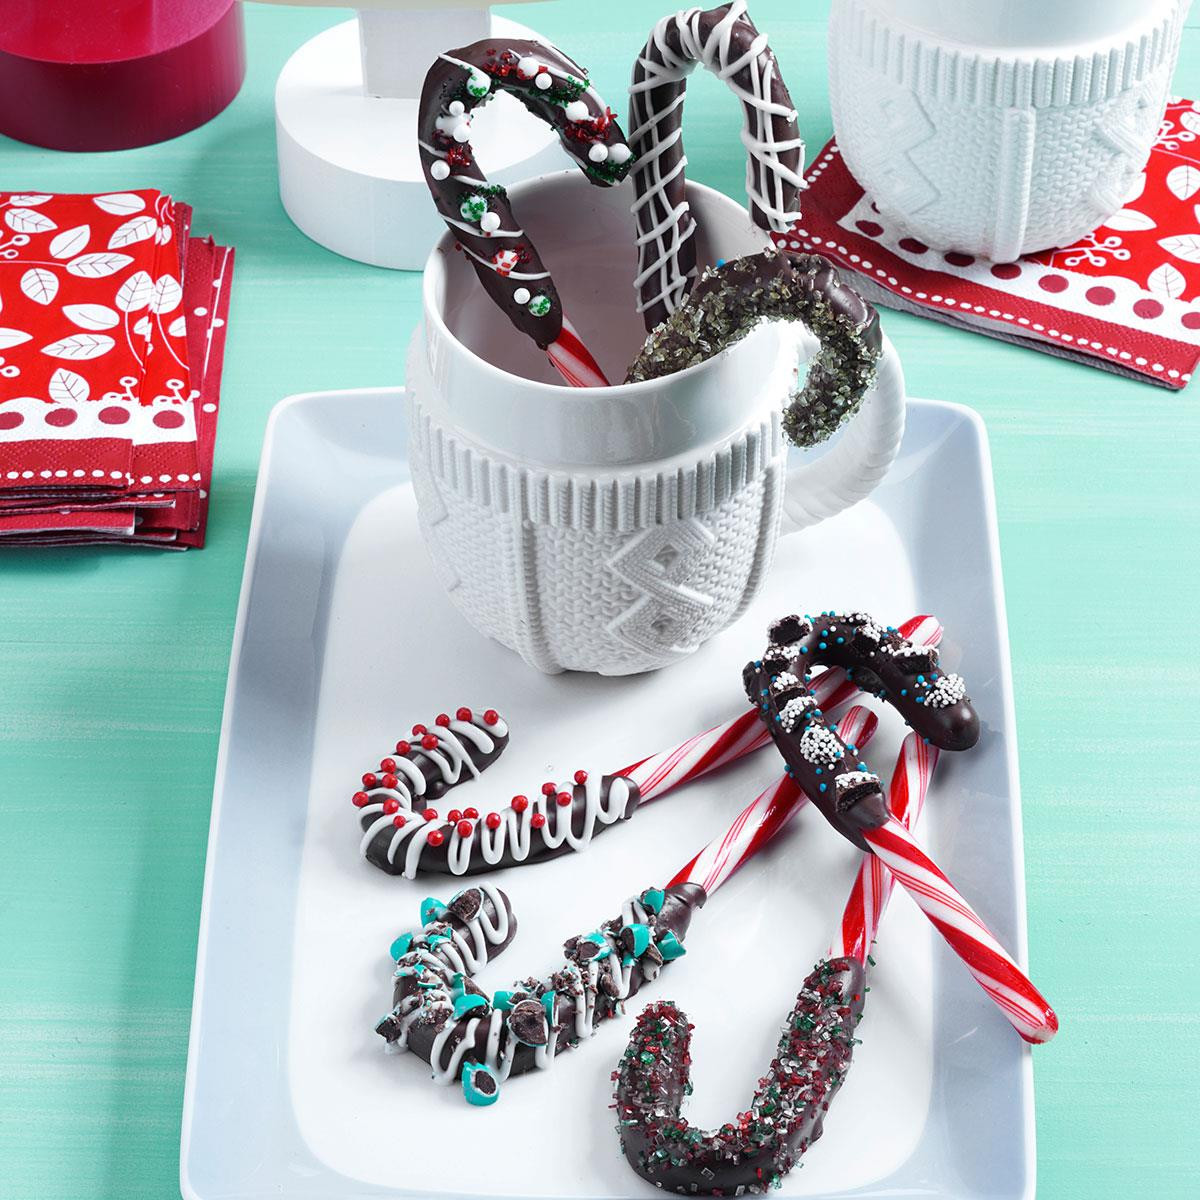 Tastes Like Candy Canes At Christmas
 Chocolate Dipped Candy Canes Recipe